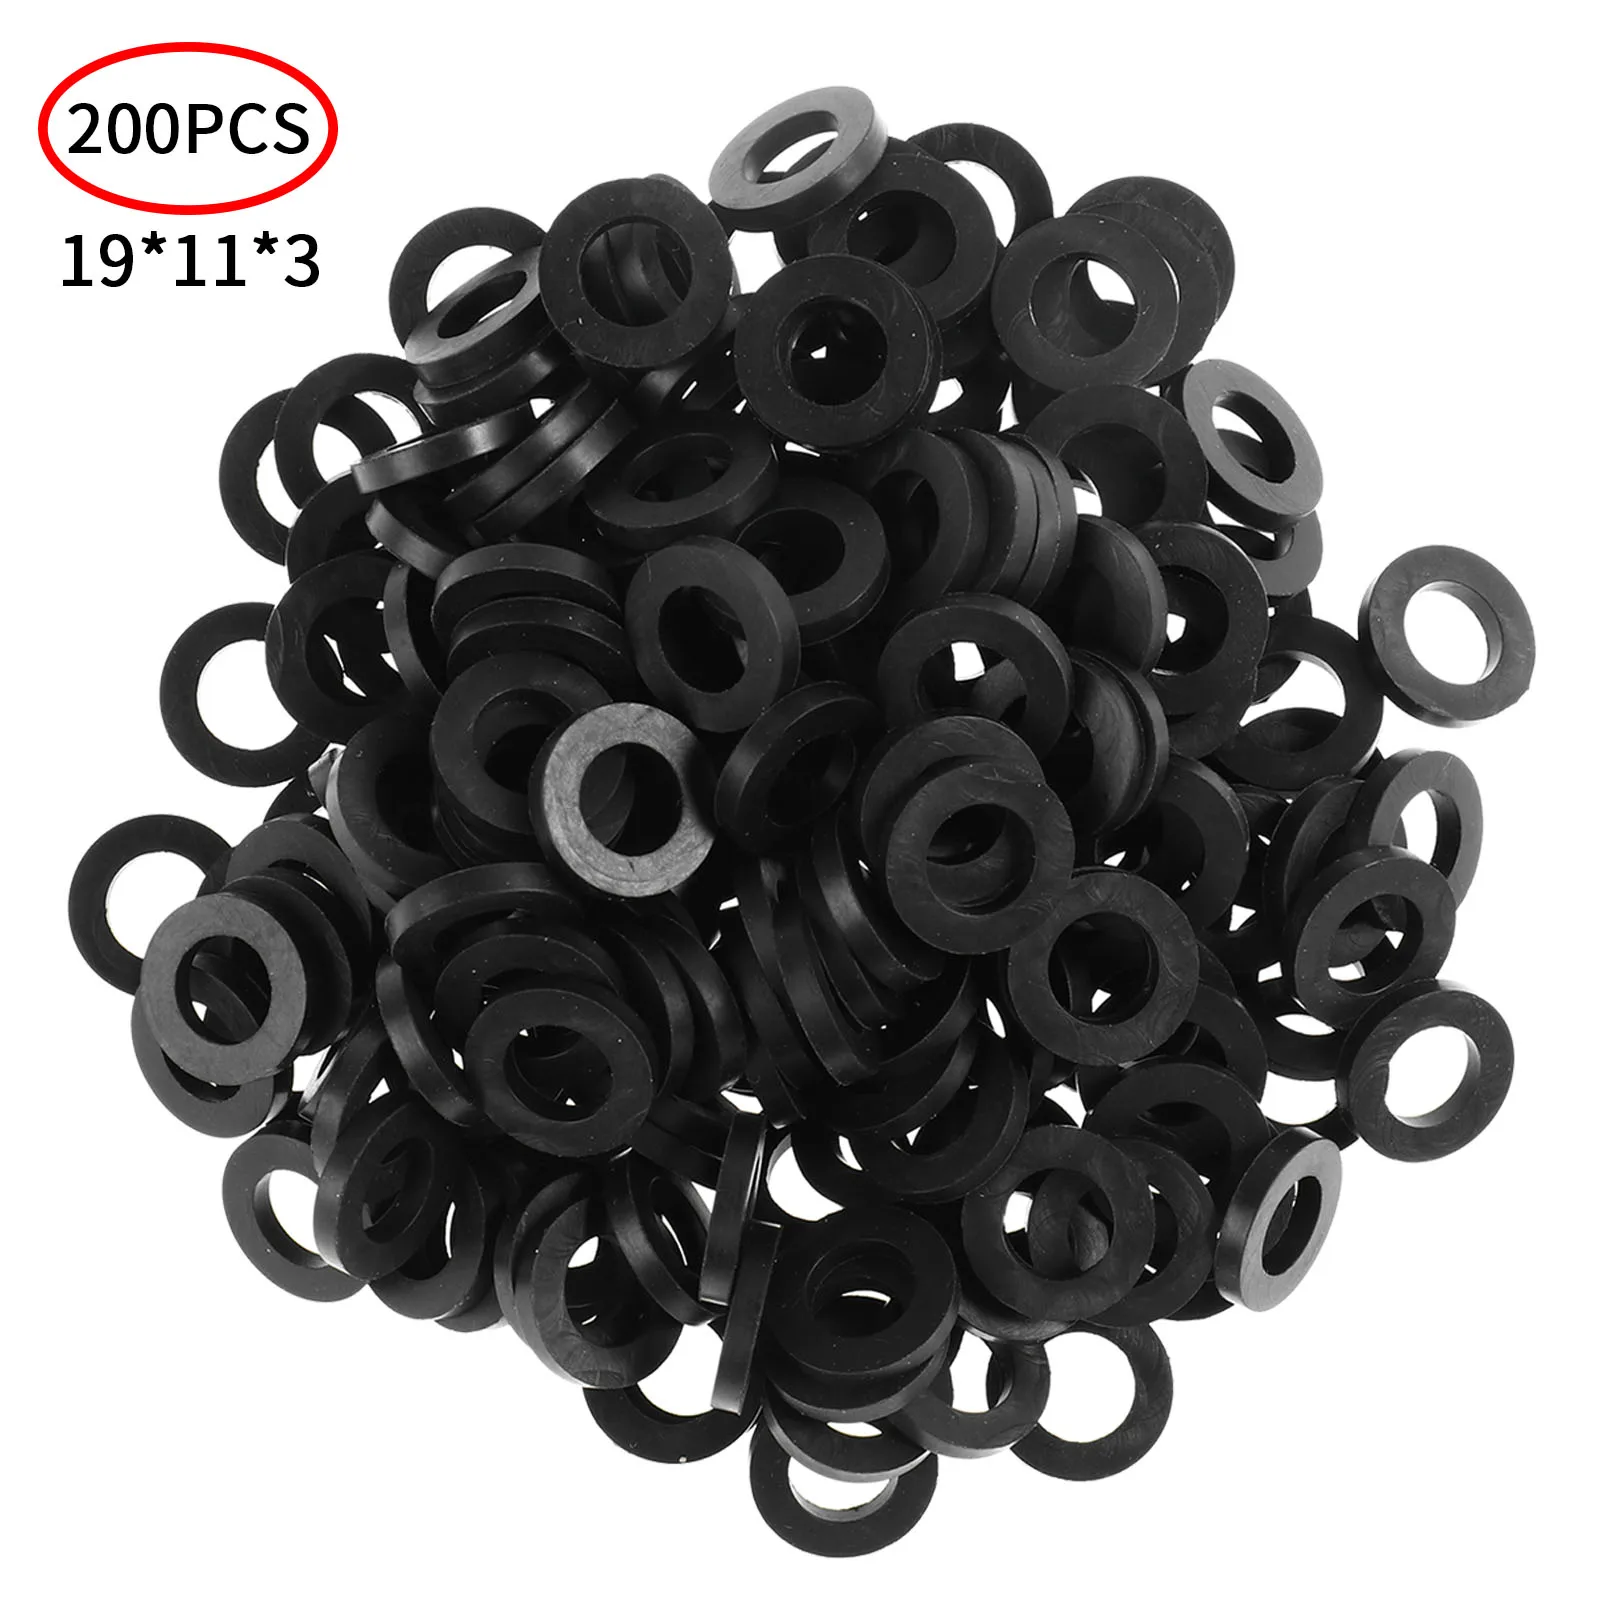 200Pcs Garden Hose Washers Rubber O Ring Washers Seals Gaskets for Water Faucet 